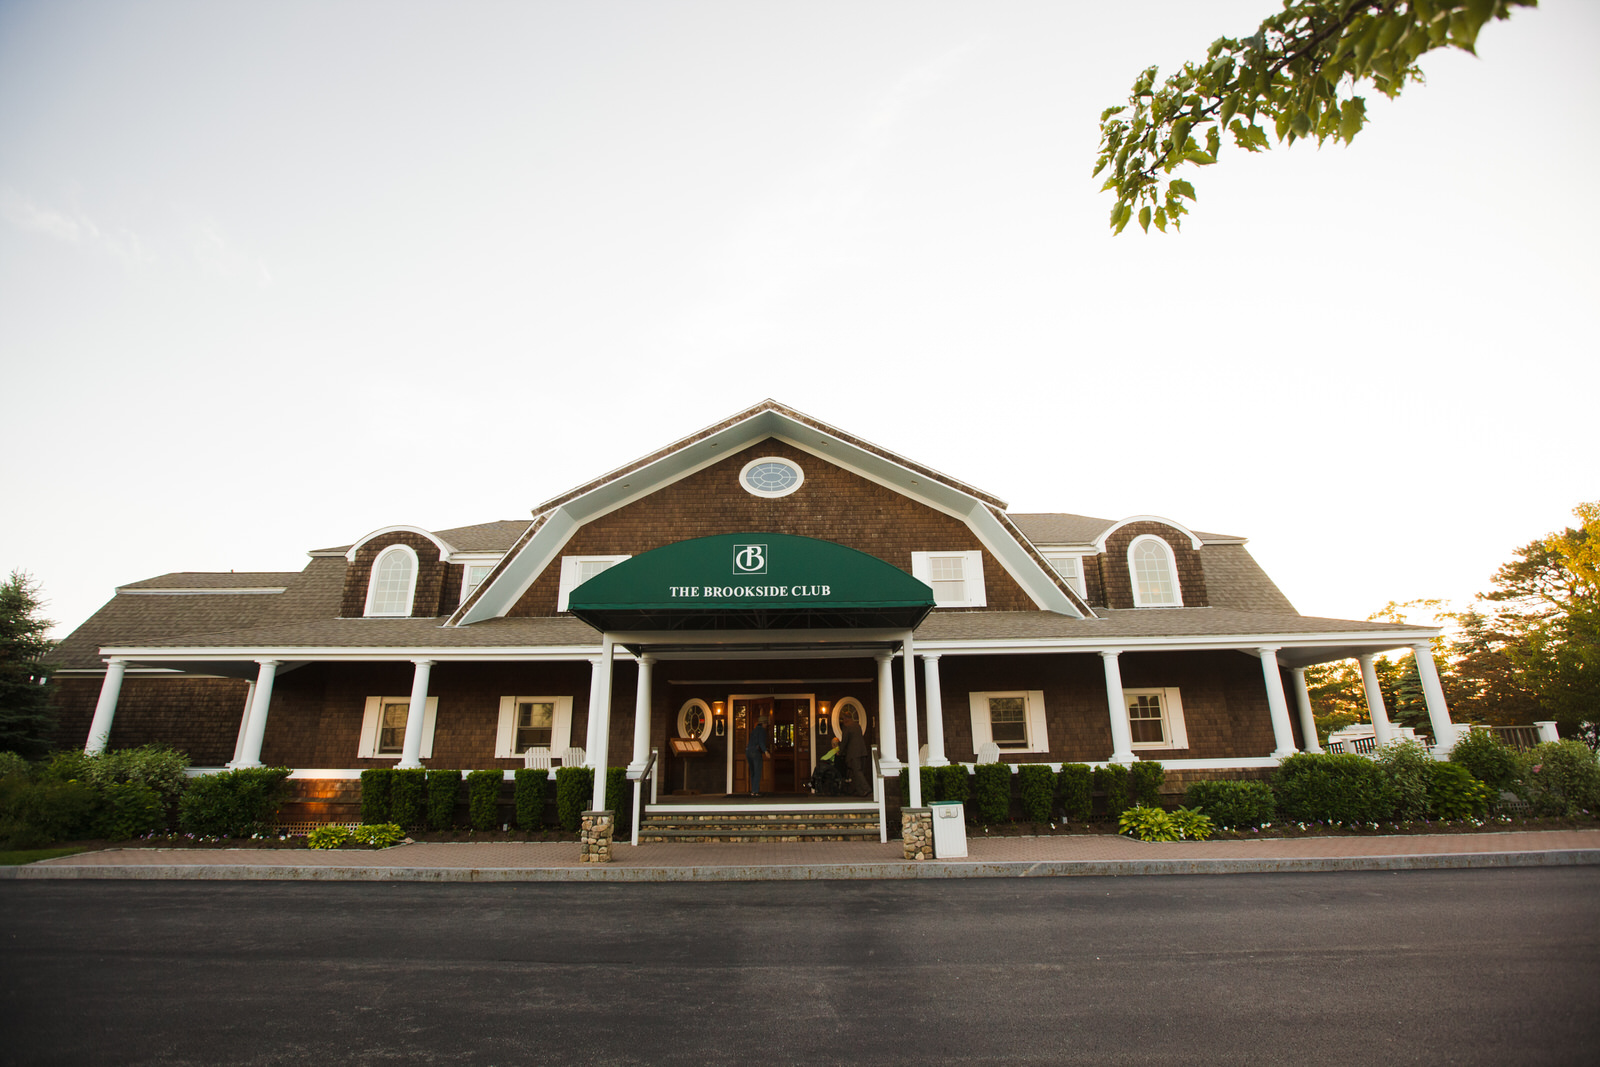 The Brookside Club Photo of the wewdding venue by Boston Wedding Photographer Nicole Chan Photography